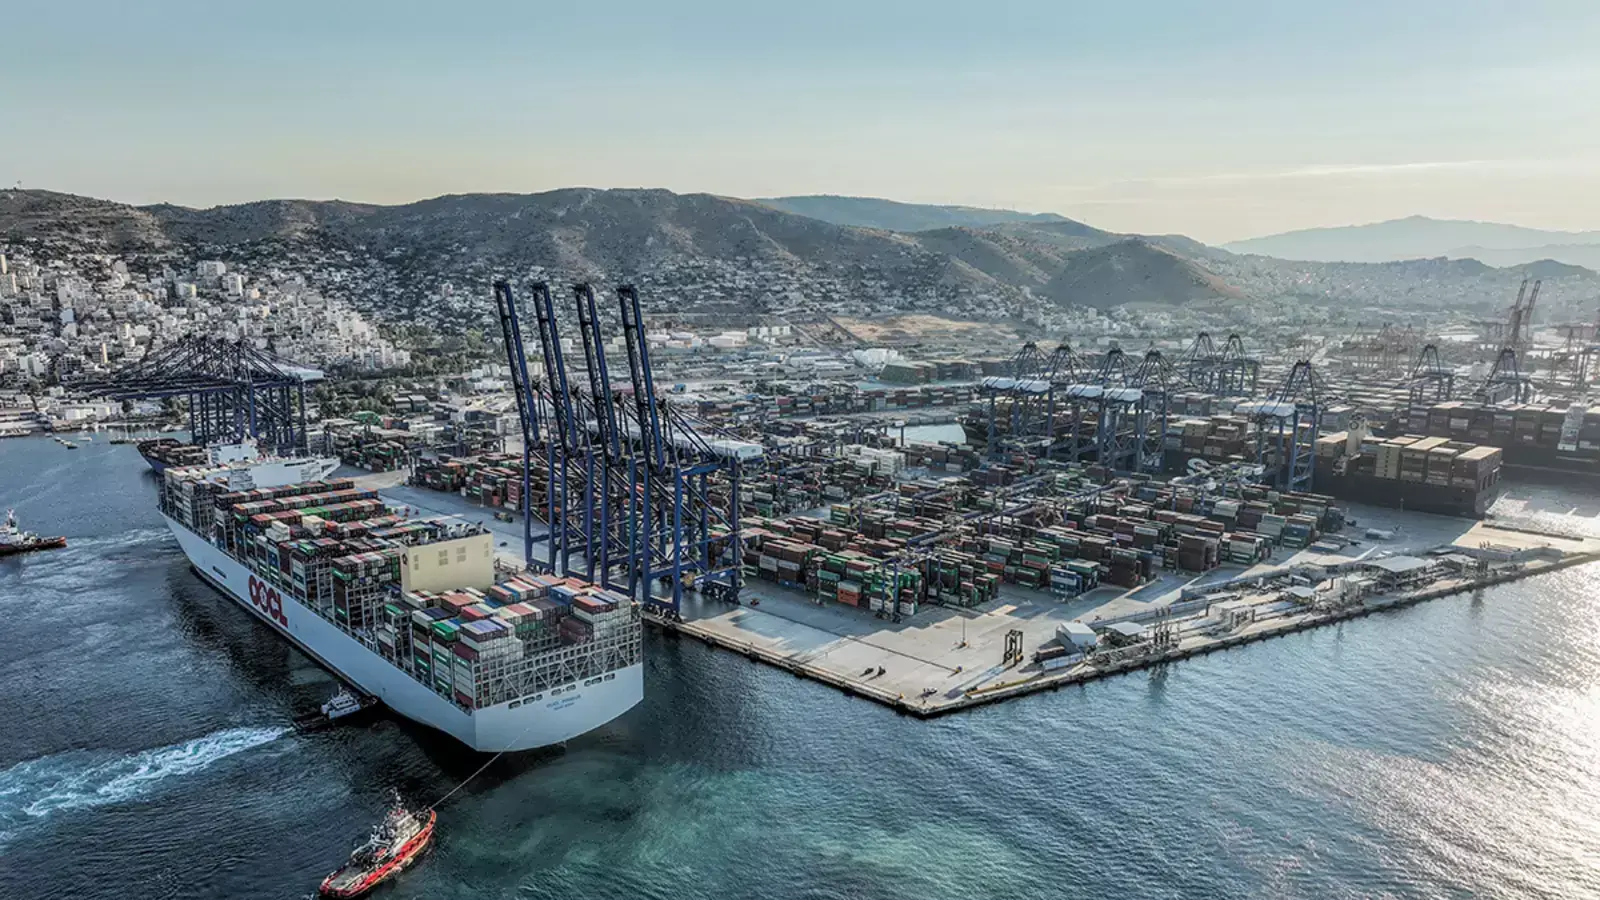 The new container ship, OOCL Piraeus, docks at the Port of Piraeus in Greece in 2023.